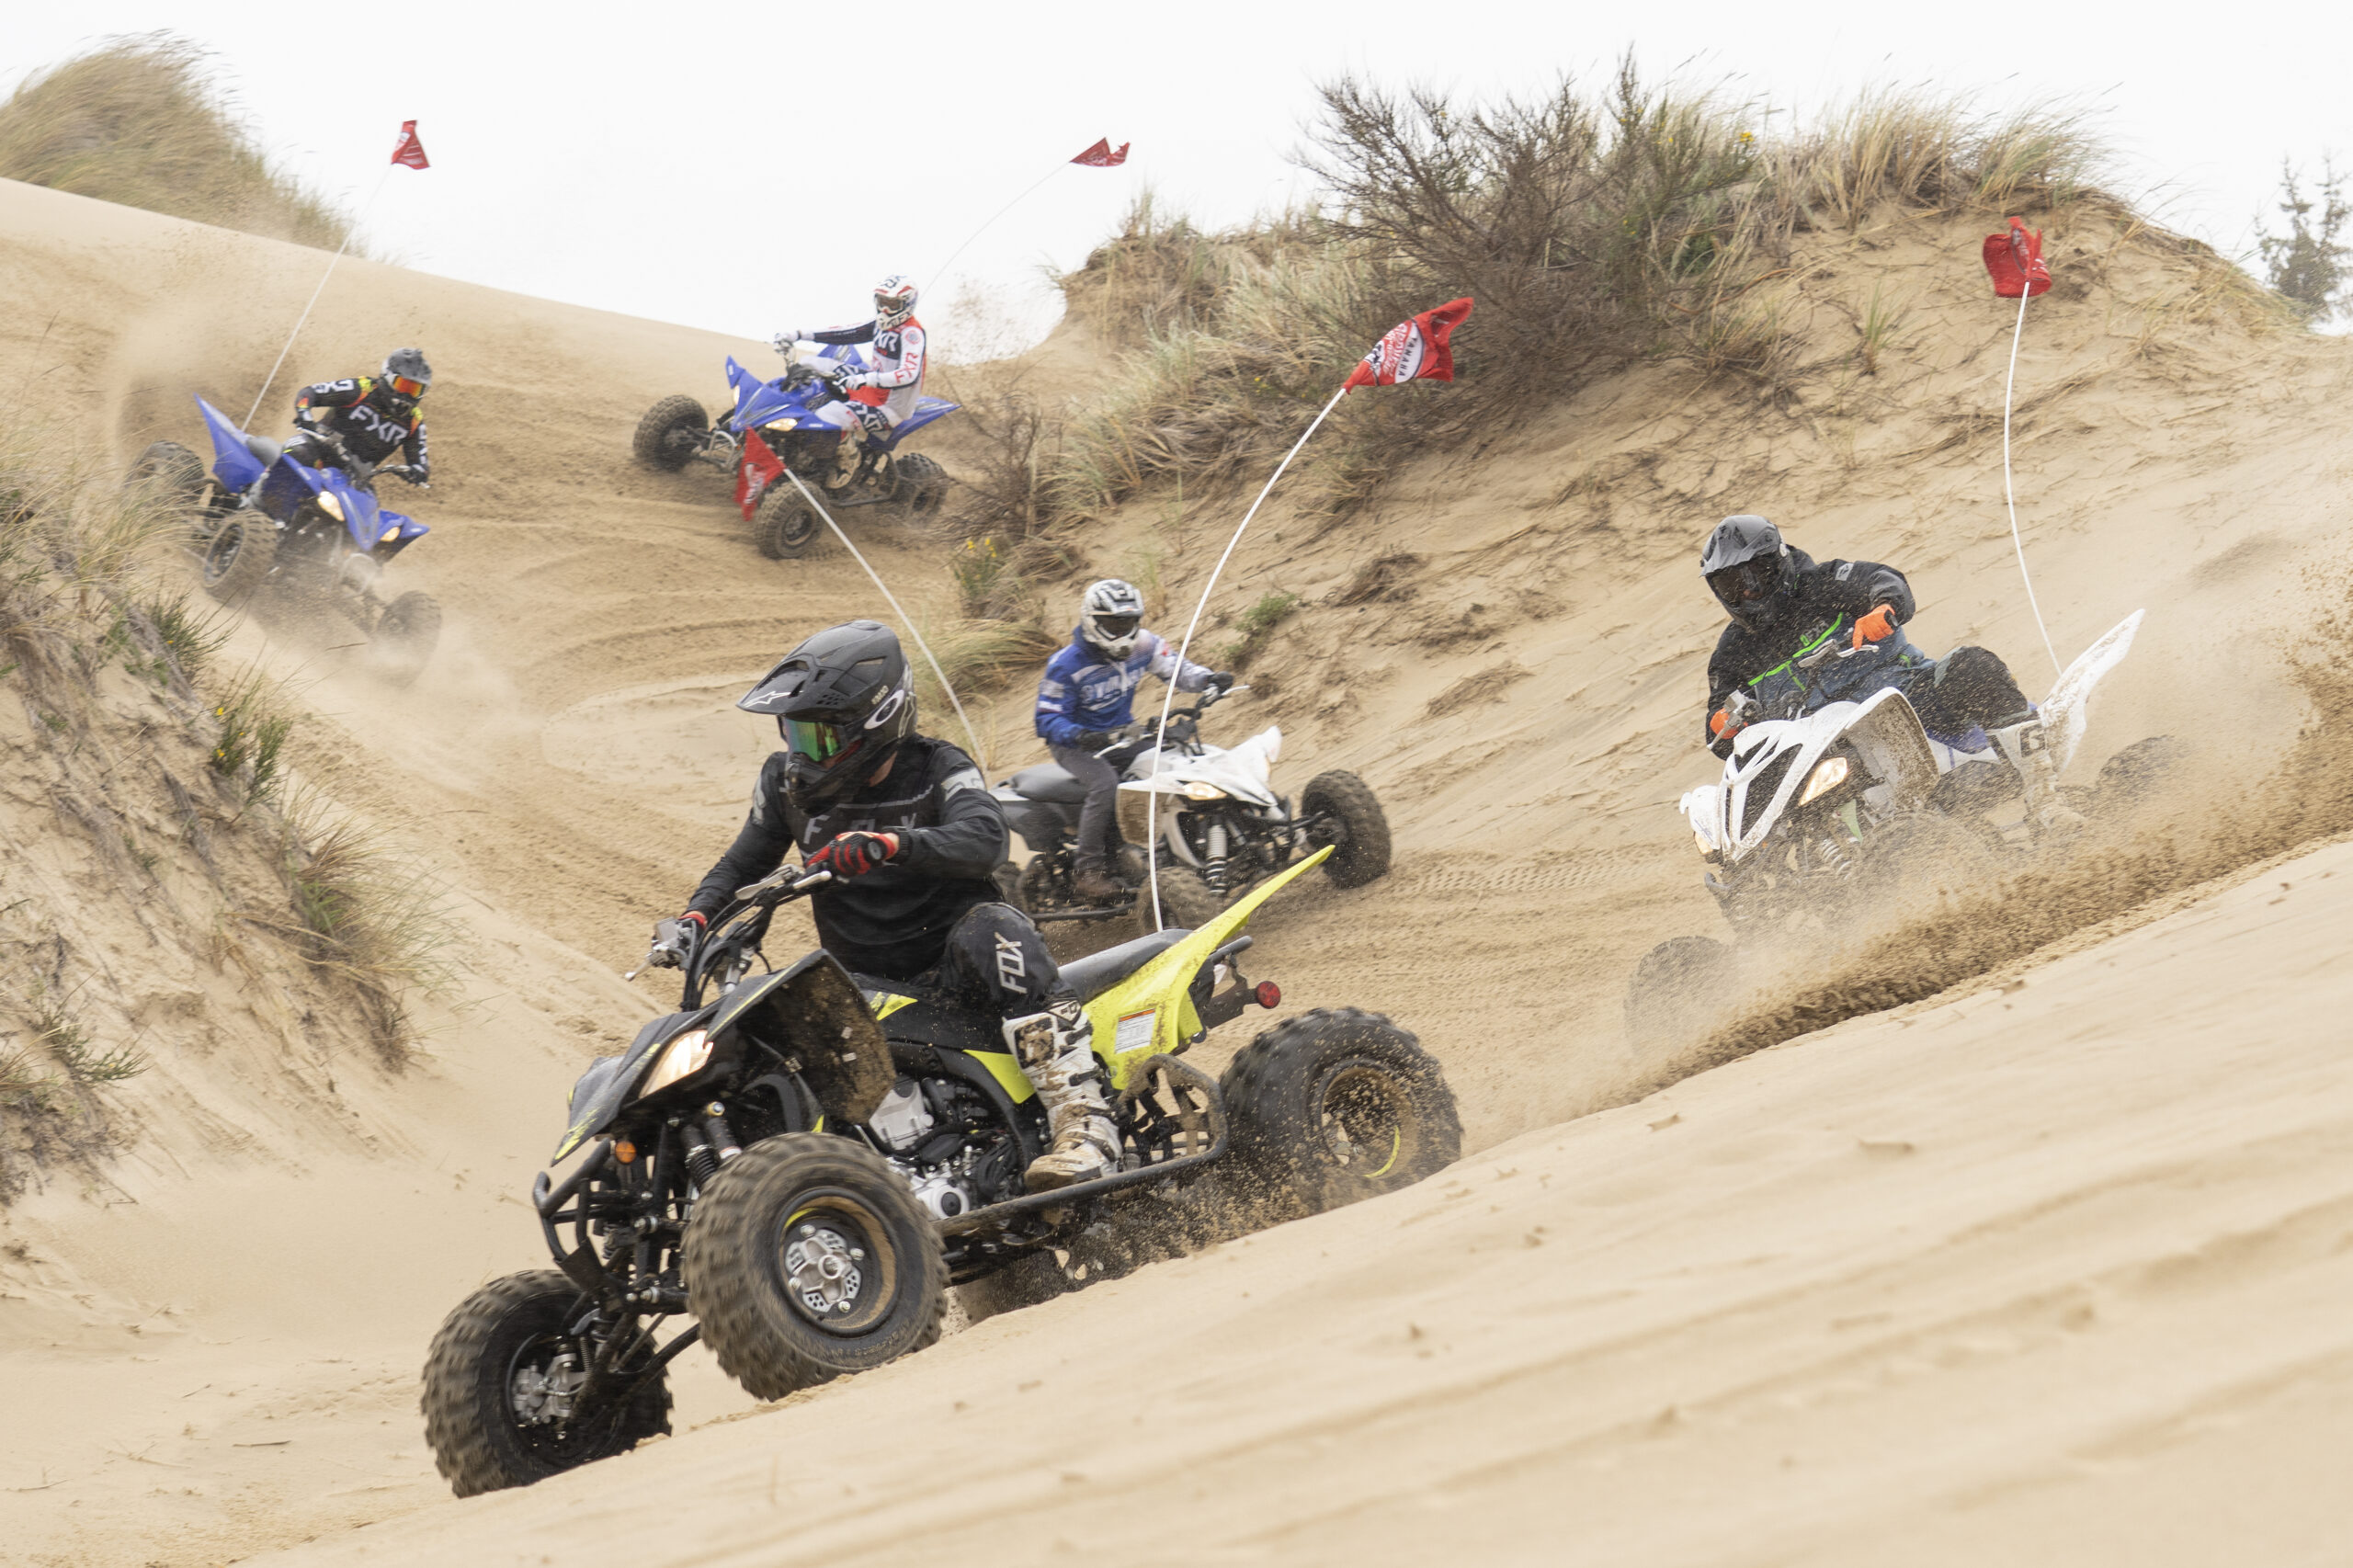 Riders putting the new Yamaha ATVs to the test.